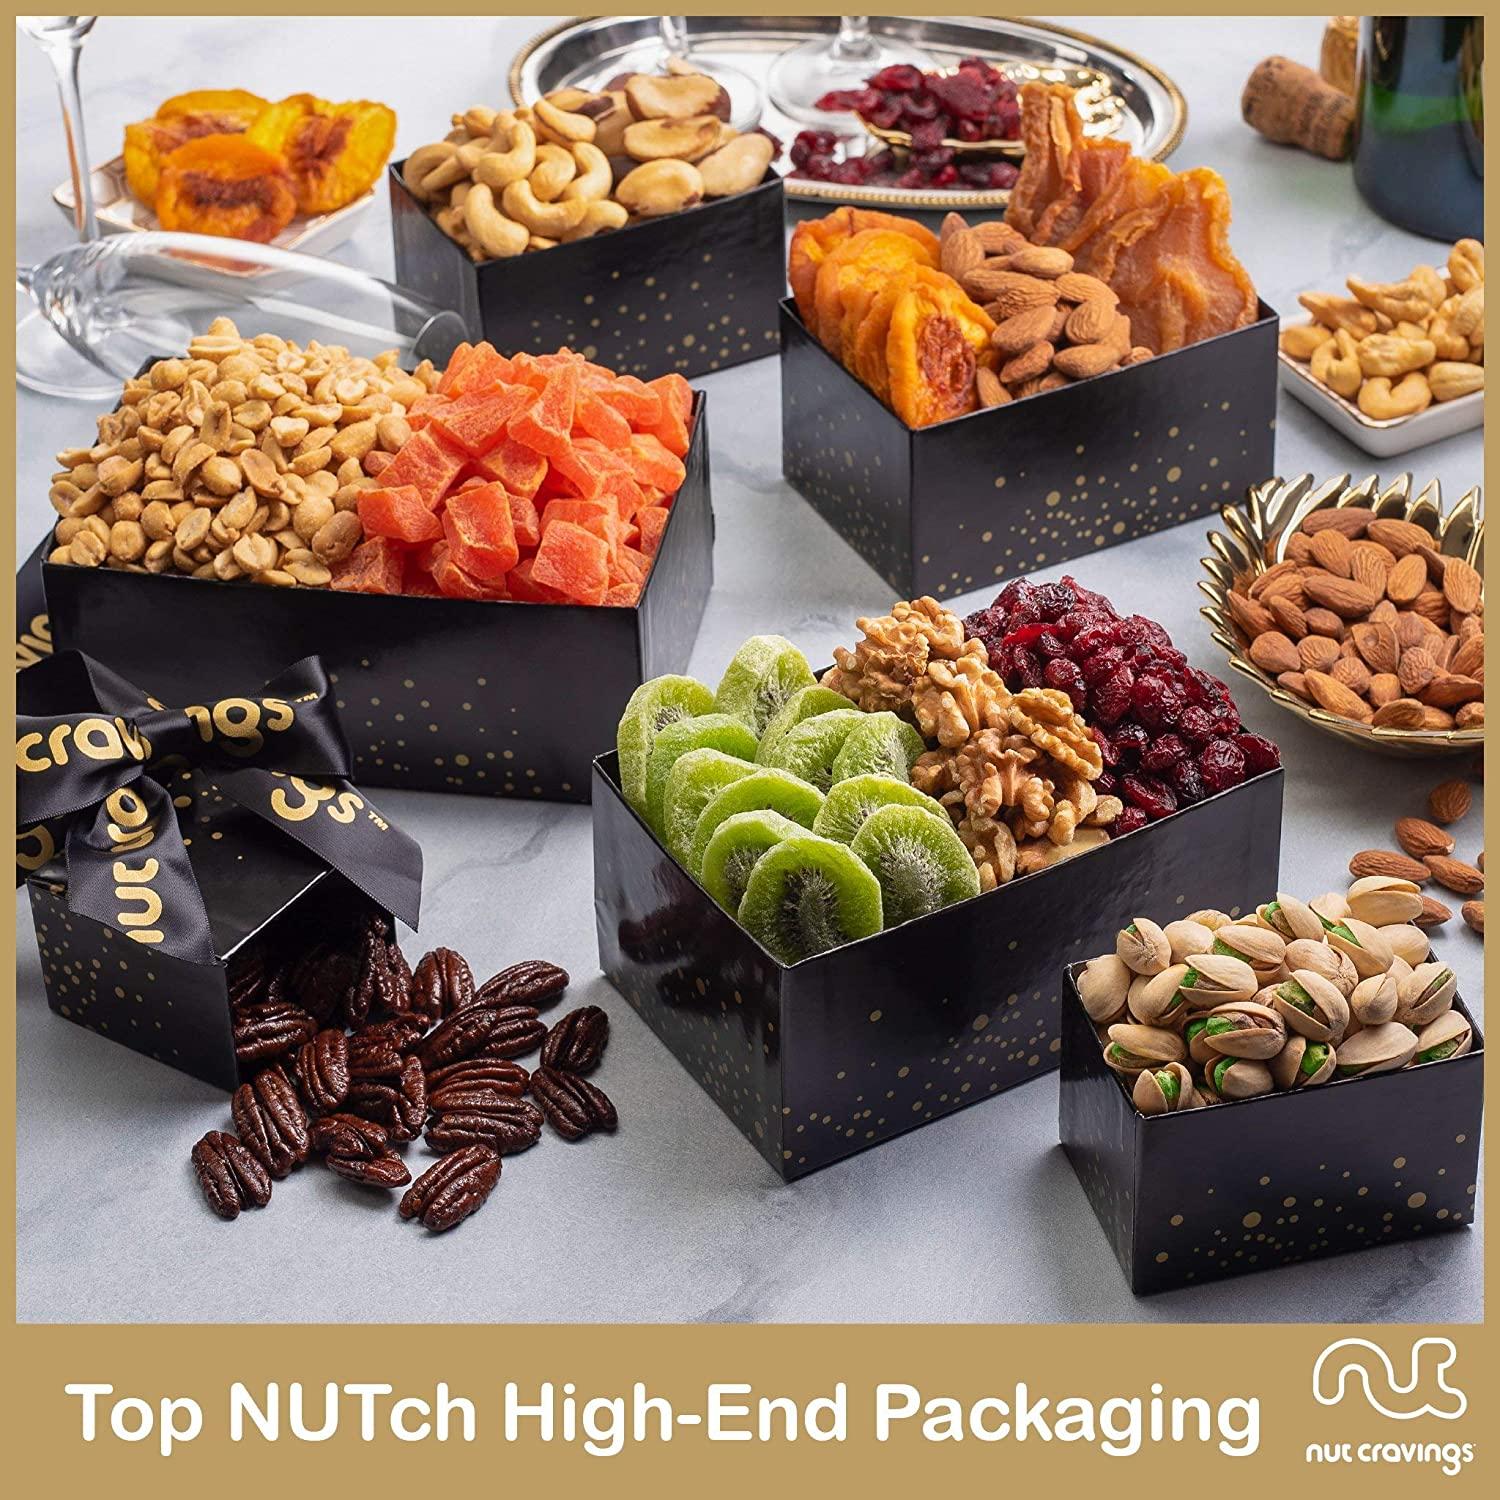 Nut Cravings Dried Fruits and Nuts Holiday Birthday Gift Basket XLarge